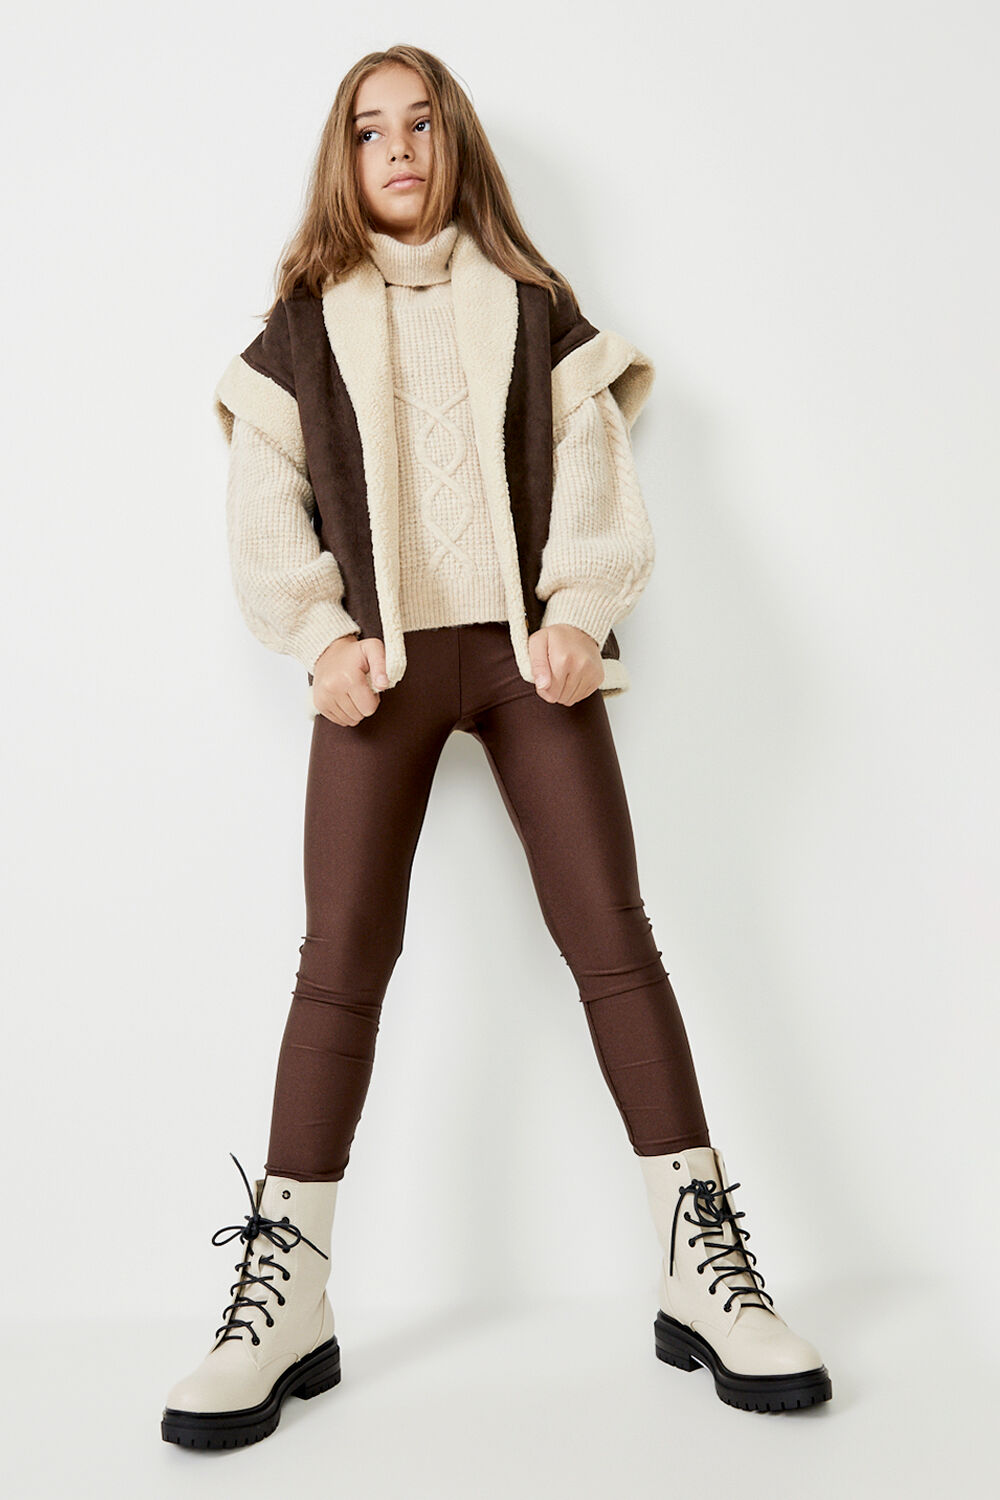 GIRLS FREYA SHEARLING VEST in colour CHOCOLATE BROWN